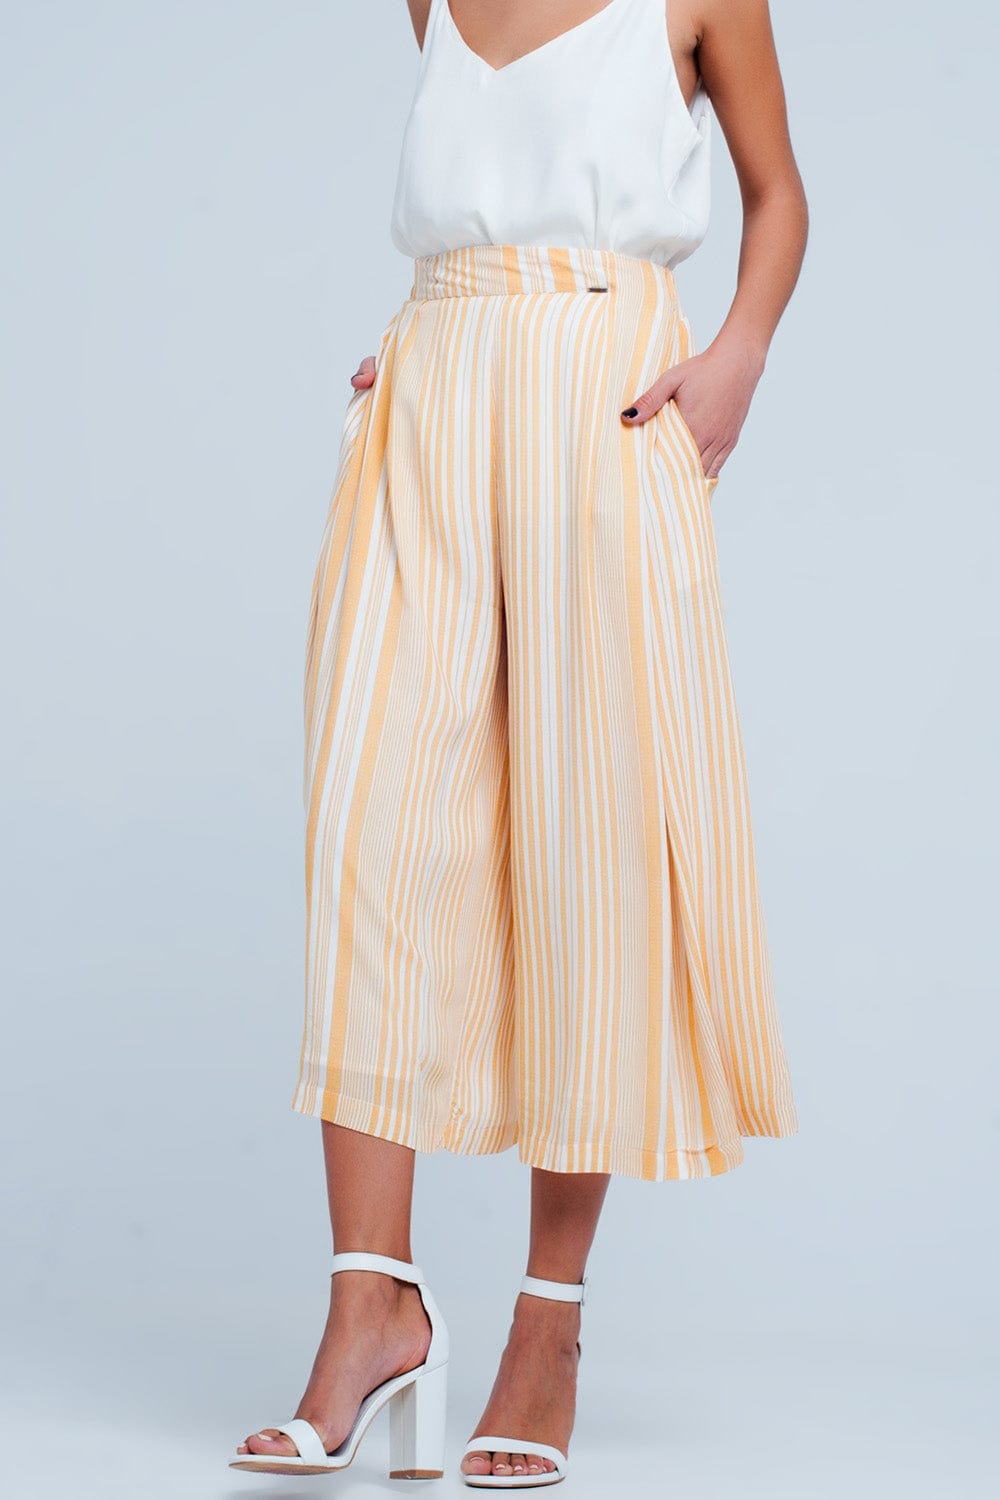 Q2 Pants Culottes in yellow stripe